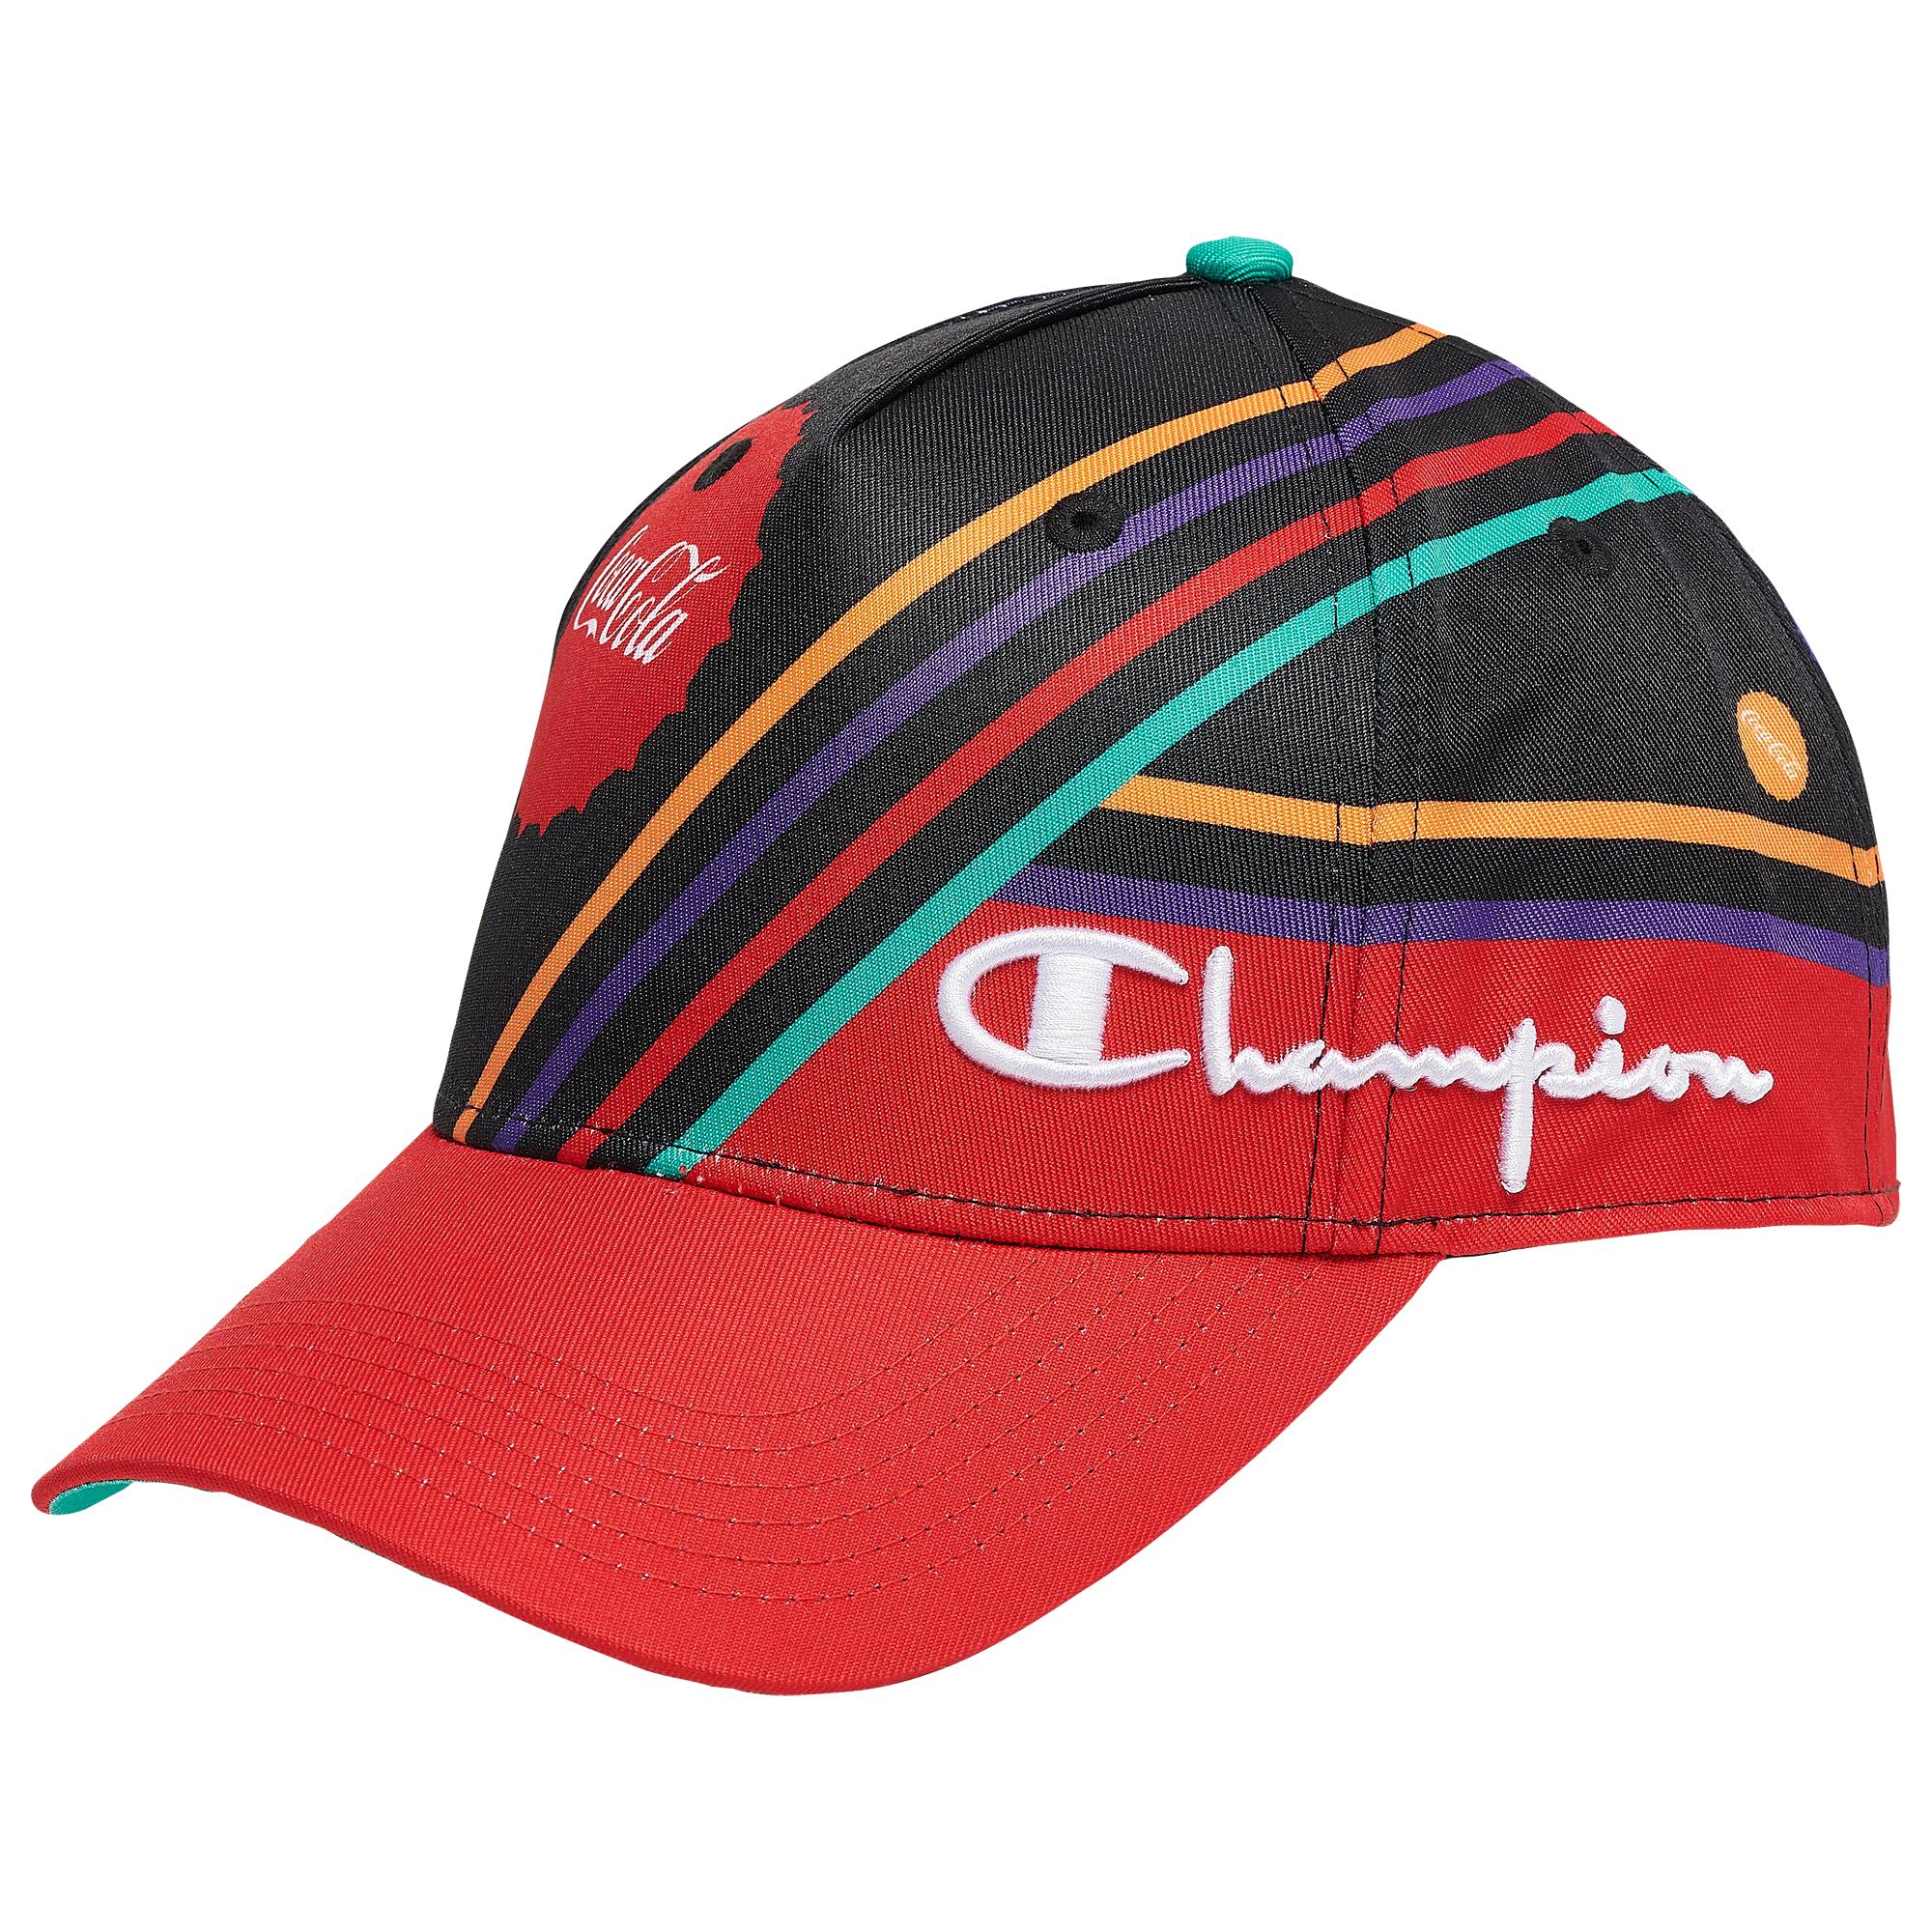 Champion Leather Coca-cola Hat in Black/Red (Red) for Men - Lyst